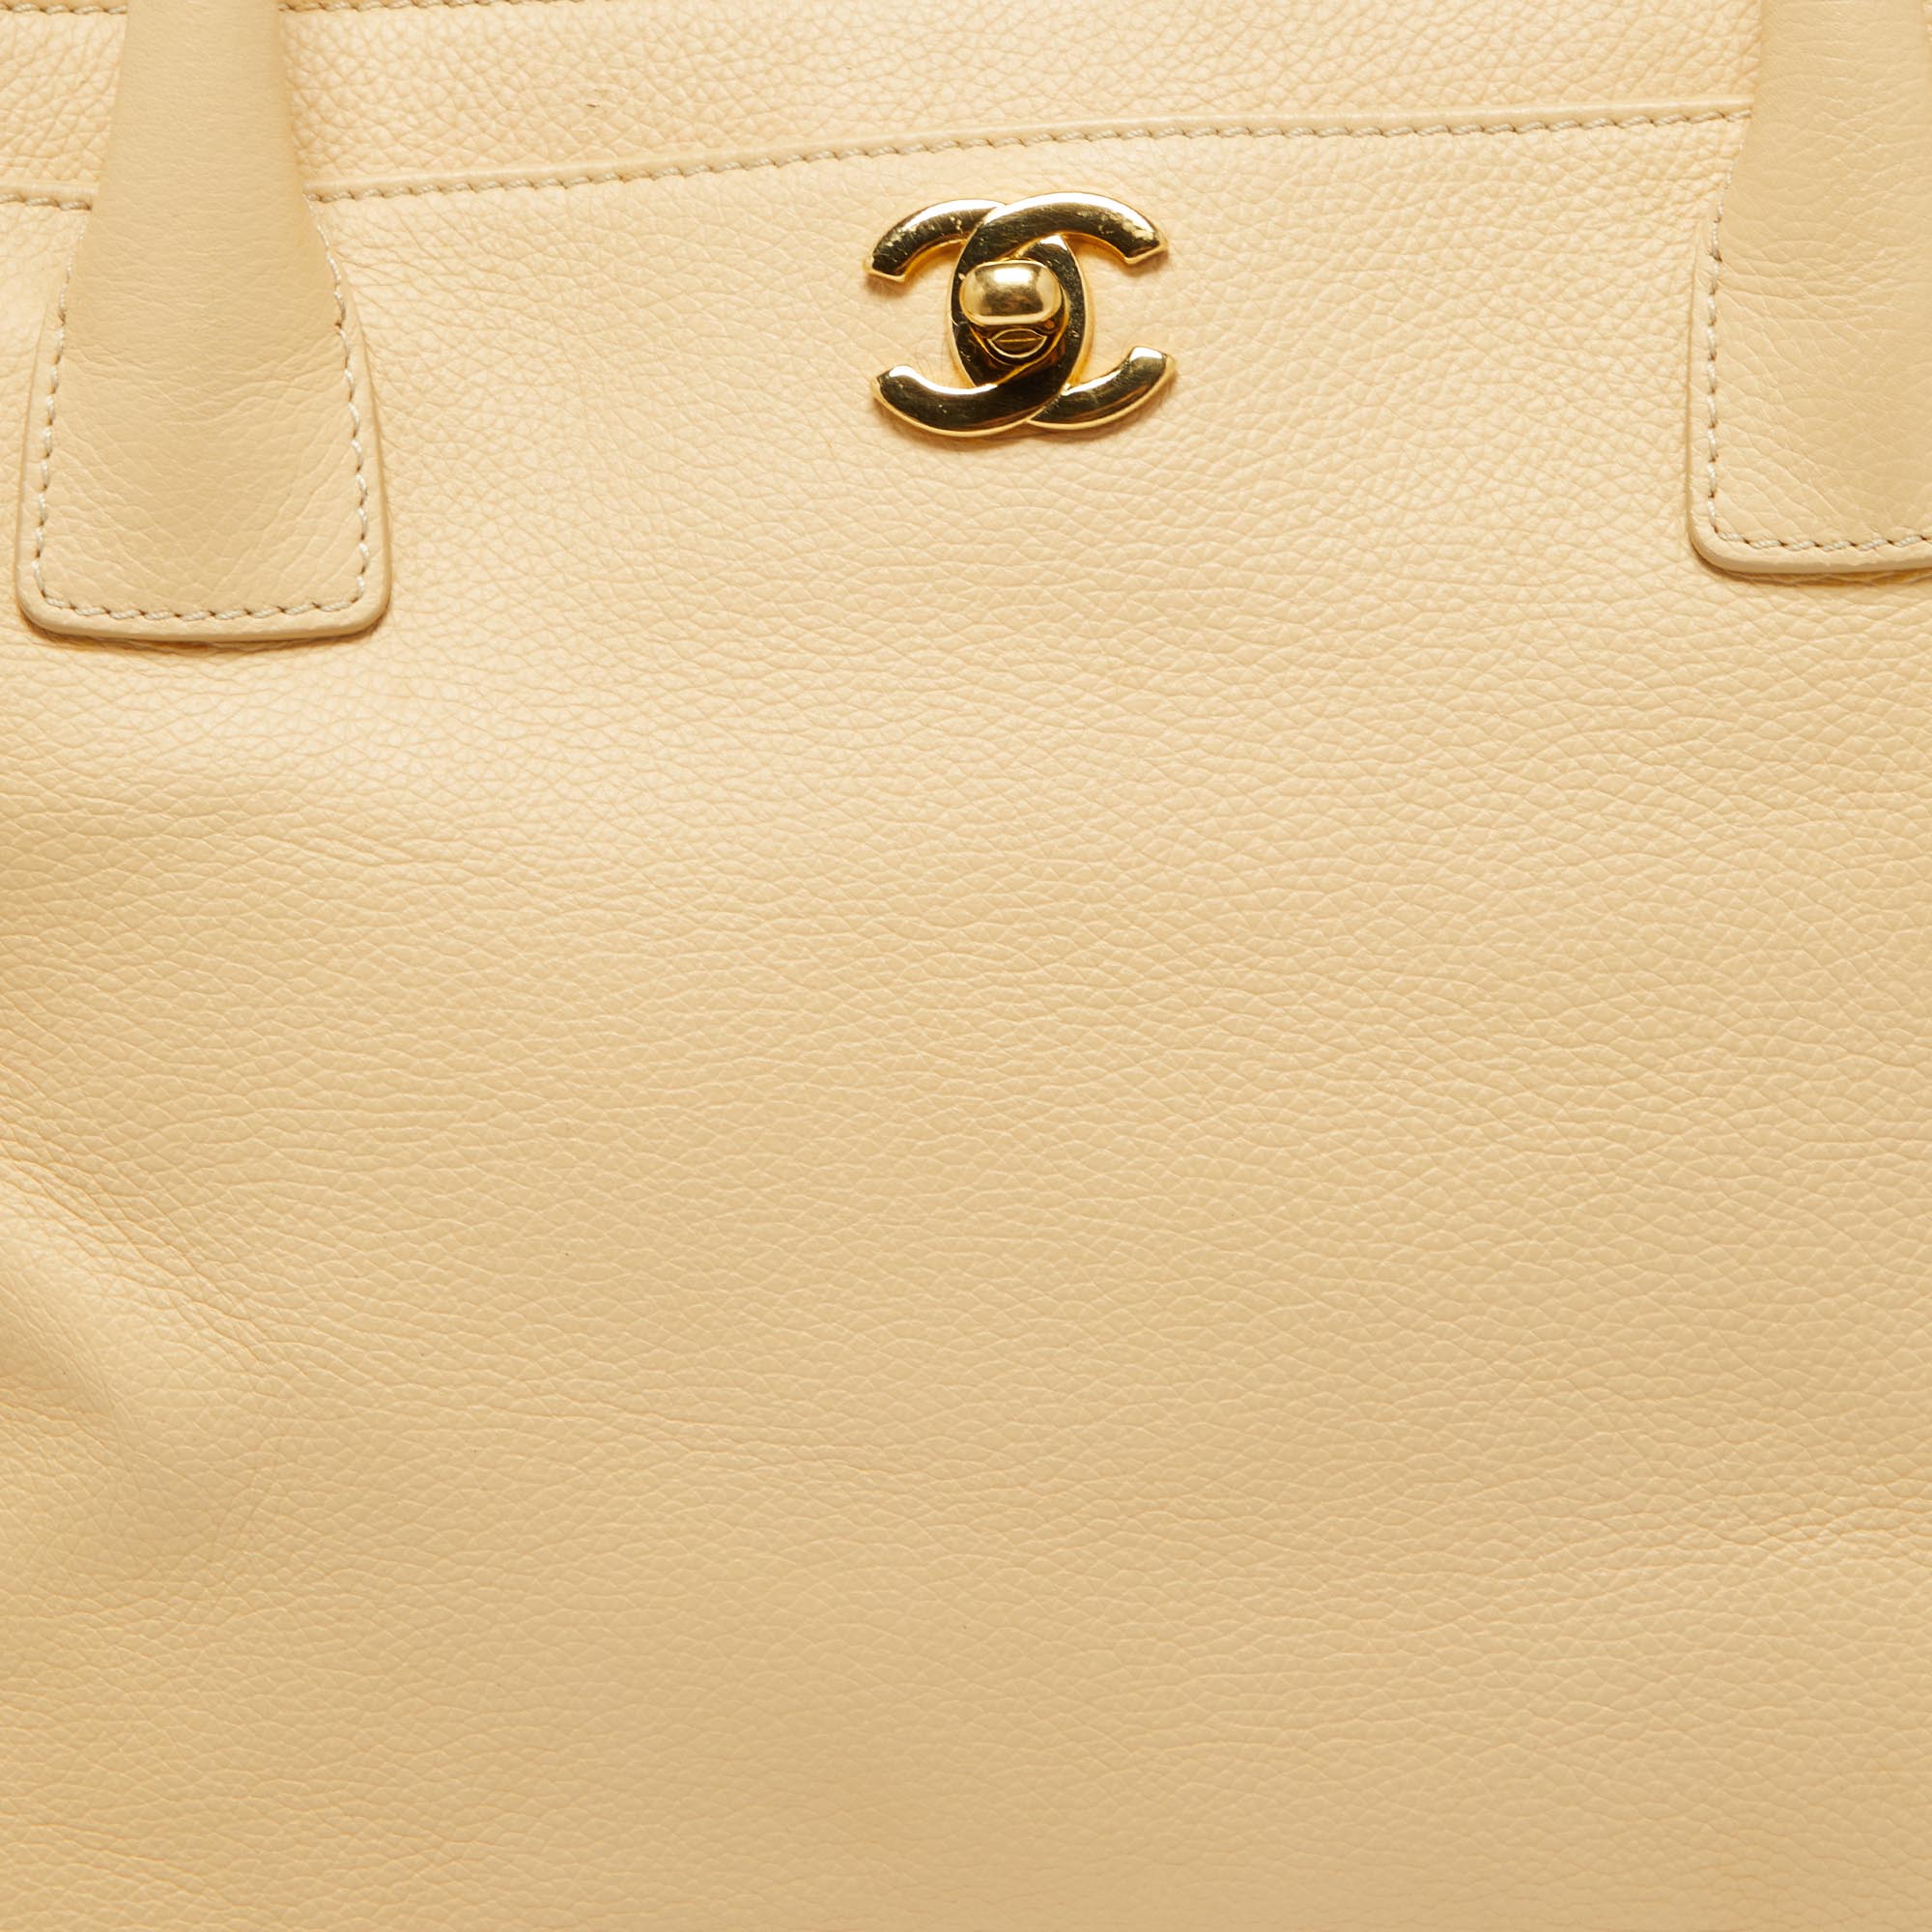 Chanel Beige Leather Cerf Shopper Tote